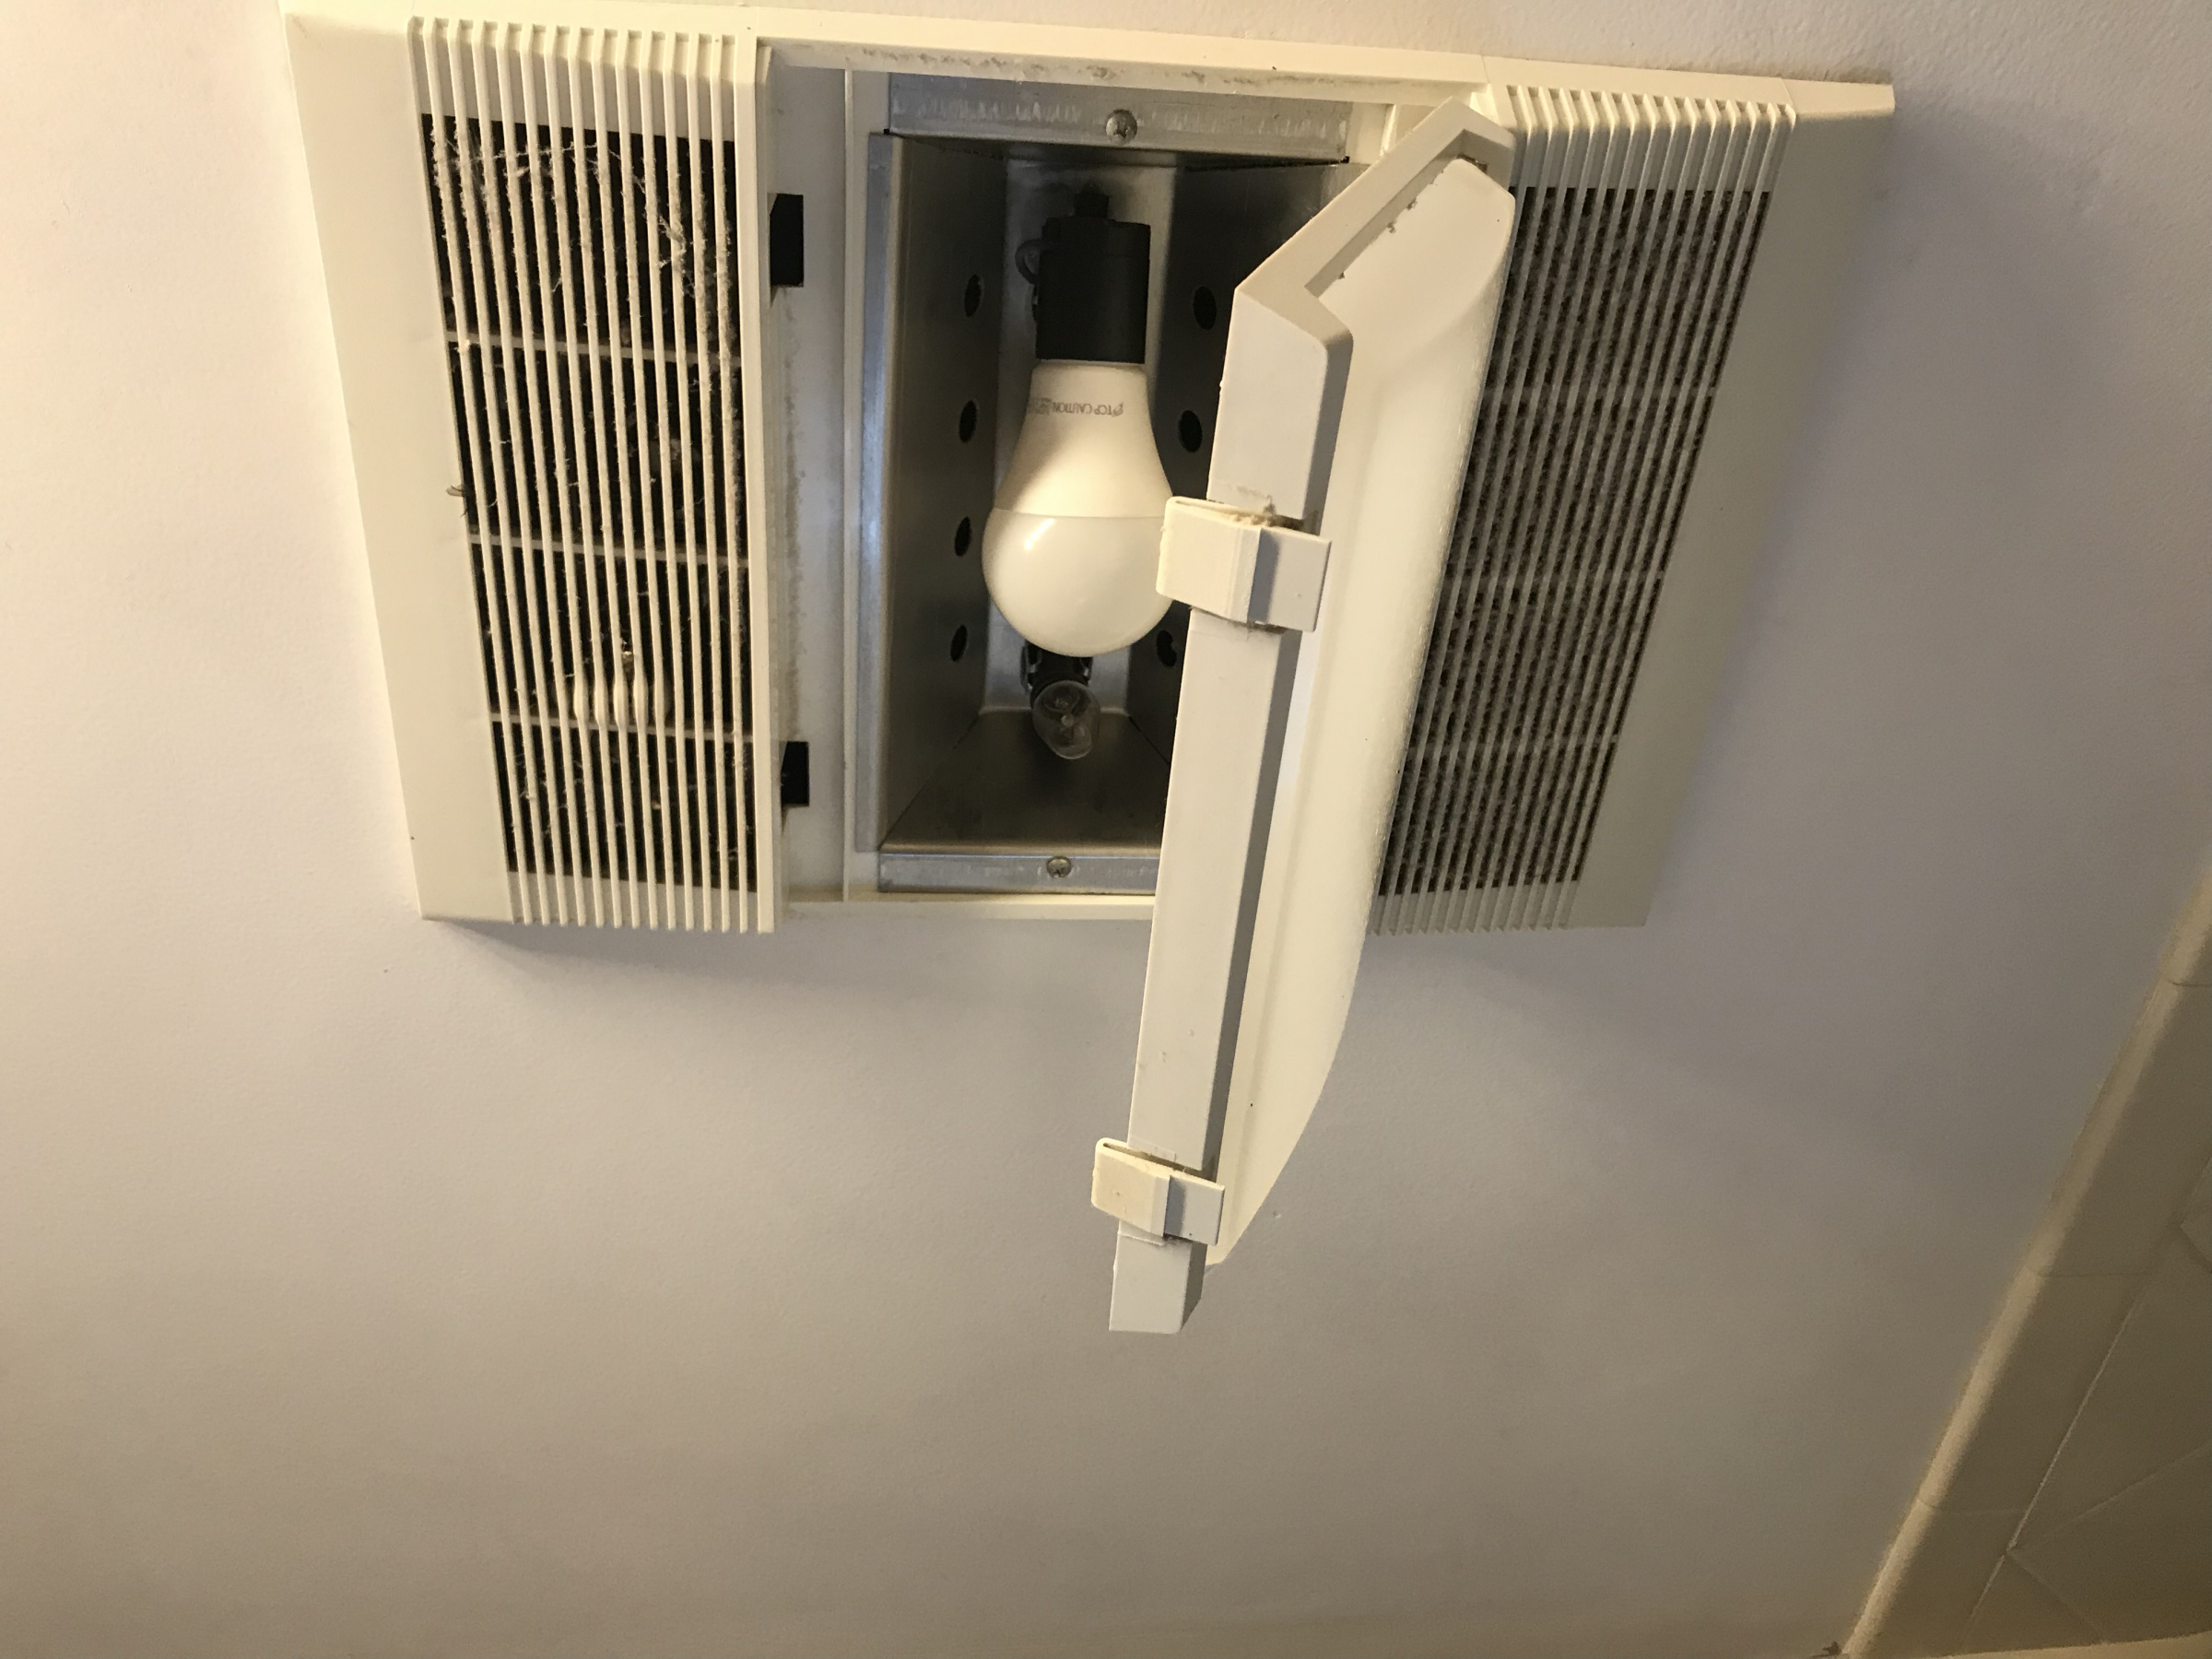 Bathroom Fan Replacement Electrical Diy Chatroom Home intended for size 2400 X 1800